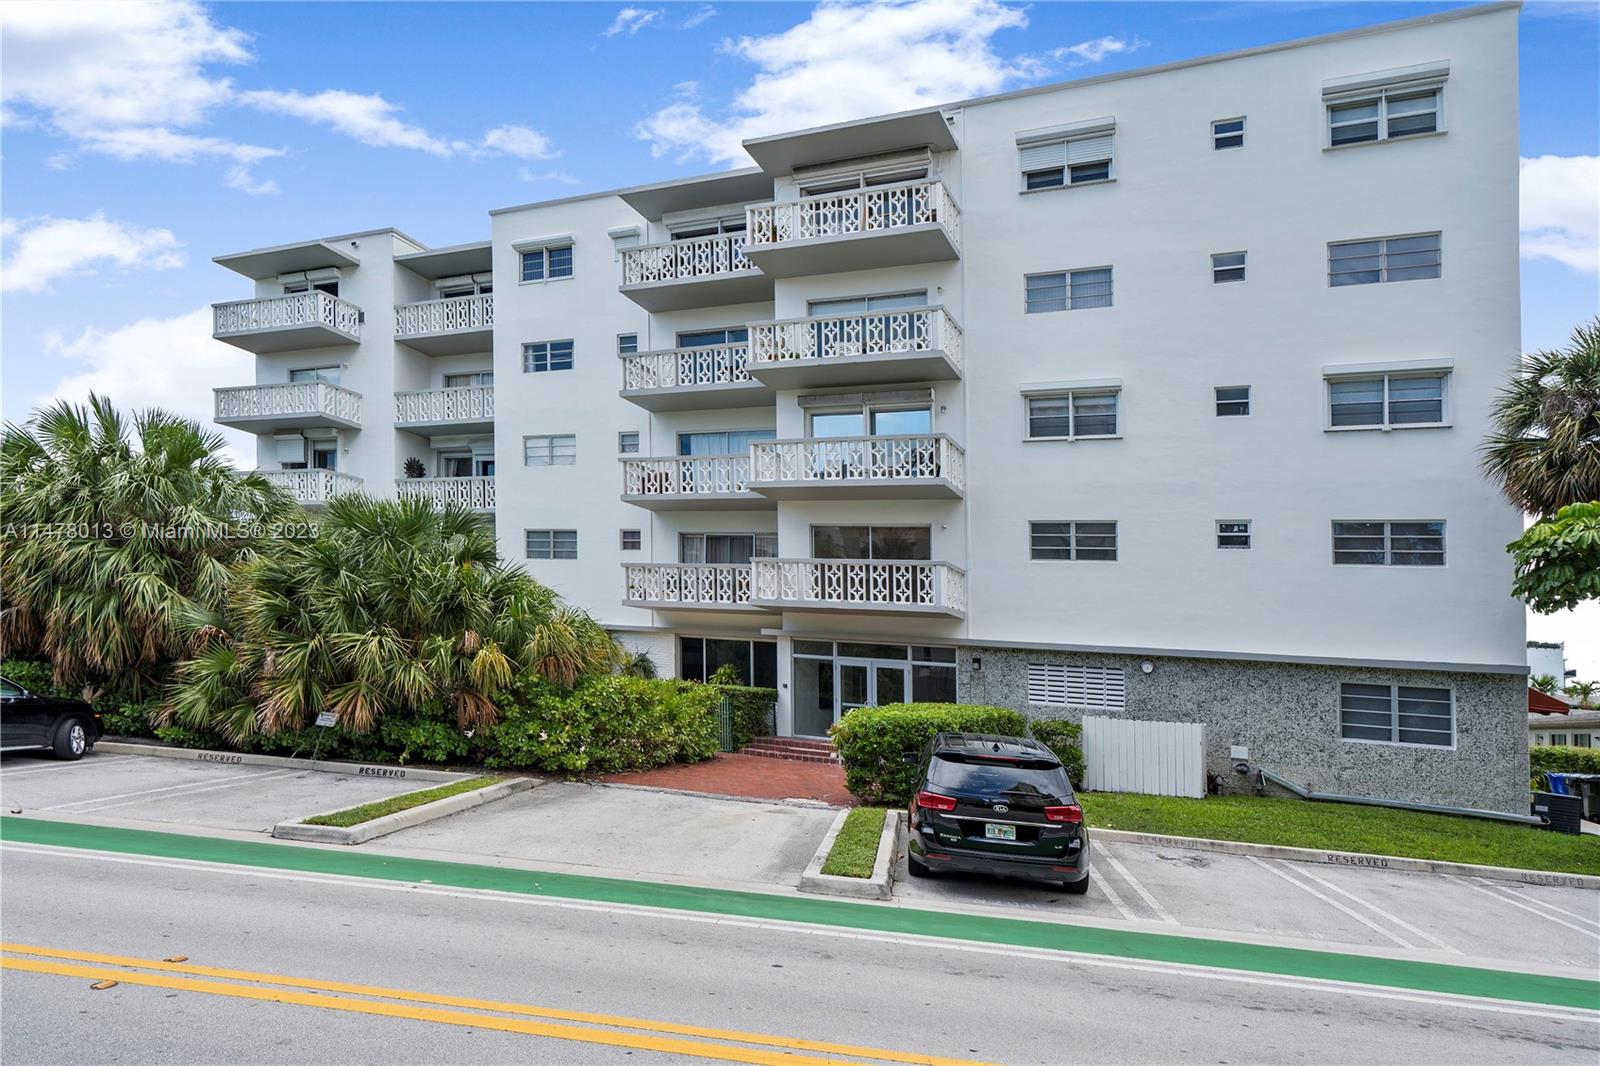 Just Listed in Bay Harbor Islands: Short Walk to Beach, Shopping, Homes of Worship. Large 1 Bedroom 1 1/2 Bath. Rented Now. Tenant will stay for Investors. Very low maintenance only $402.00 per month. Nice Pool. Please allow 24 Hours Notice to Show. Tenant Occupied Special Assessment $156.00 Monthly.